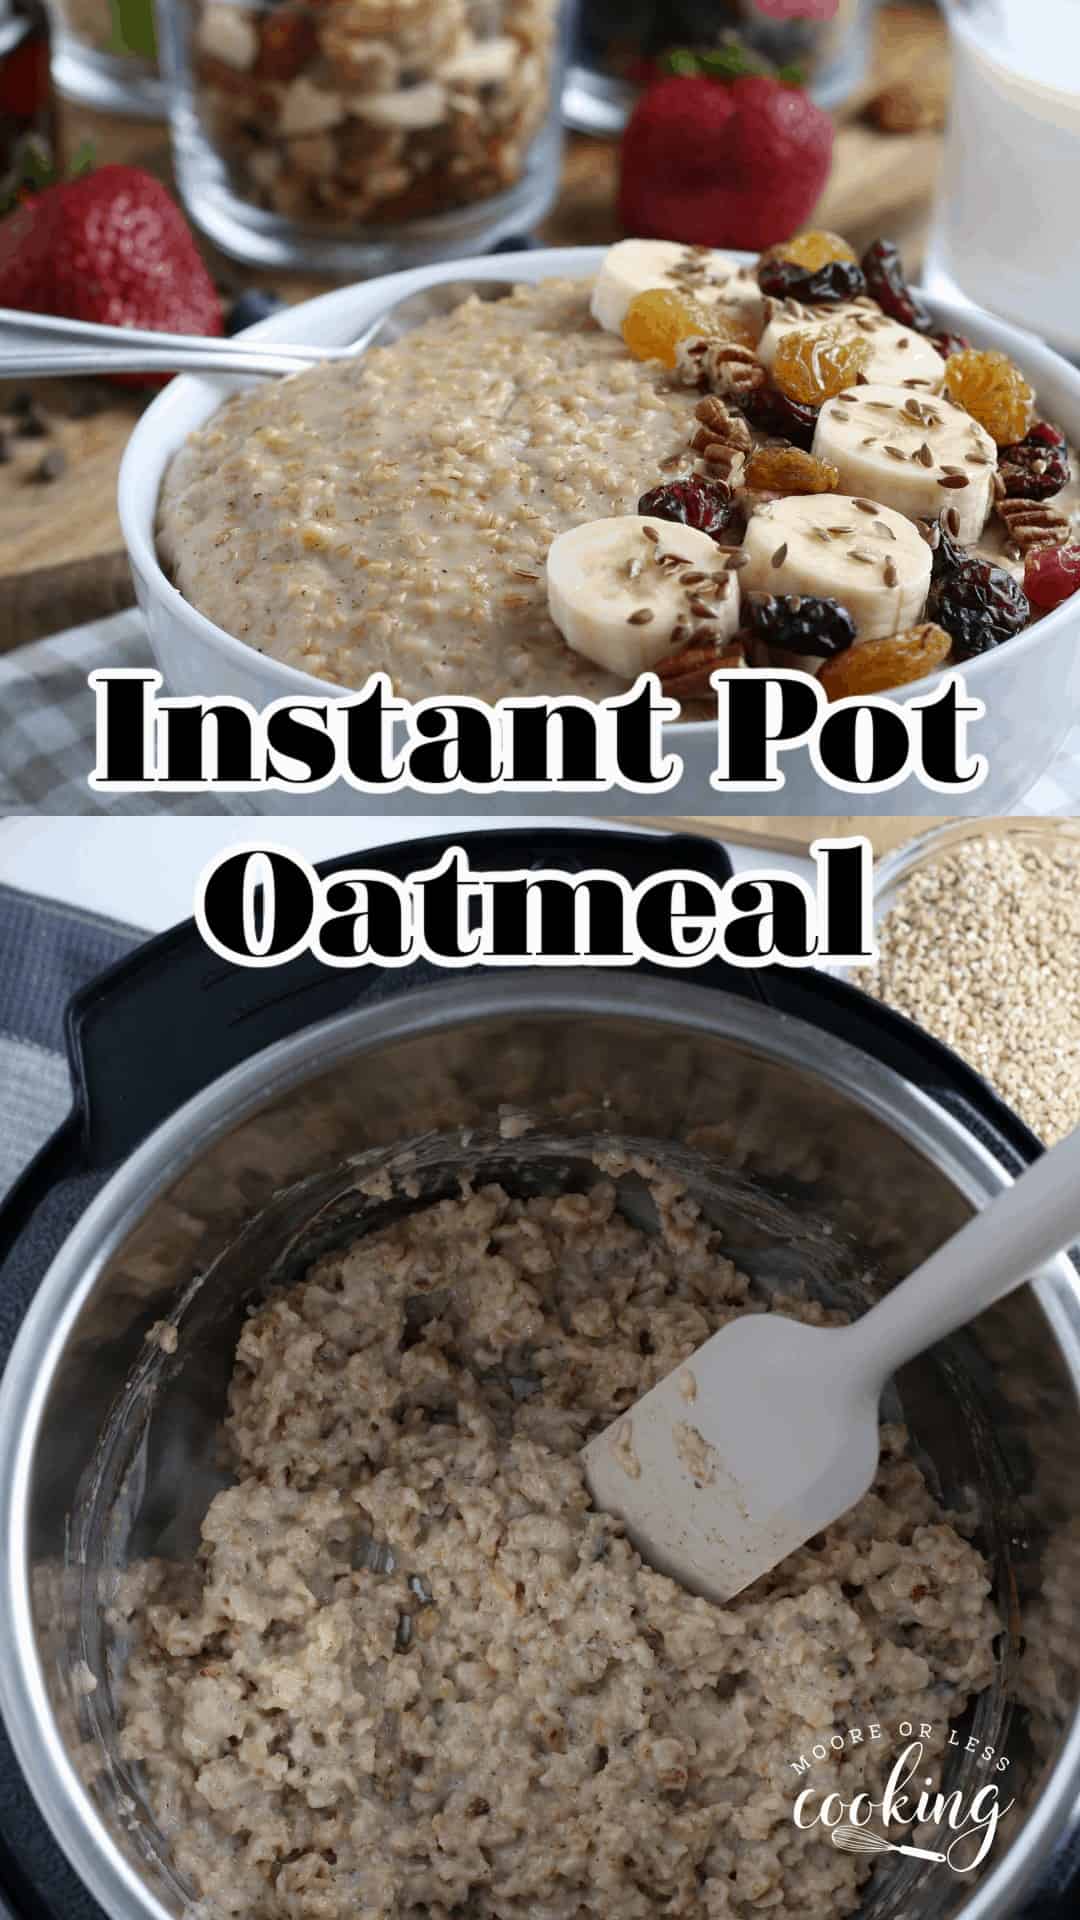 Instant Pot Oatmeal Creamy, healthy, and infinitely customizable with delicious toppings, this Instant Pot Oatmeal recipe is an easy way to make the perfect breakfast bowl, every time. via @Mooreorlesscook